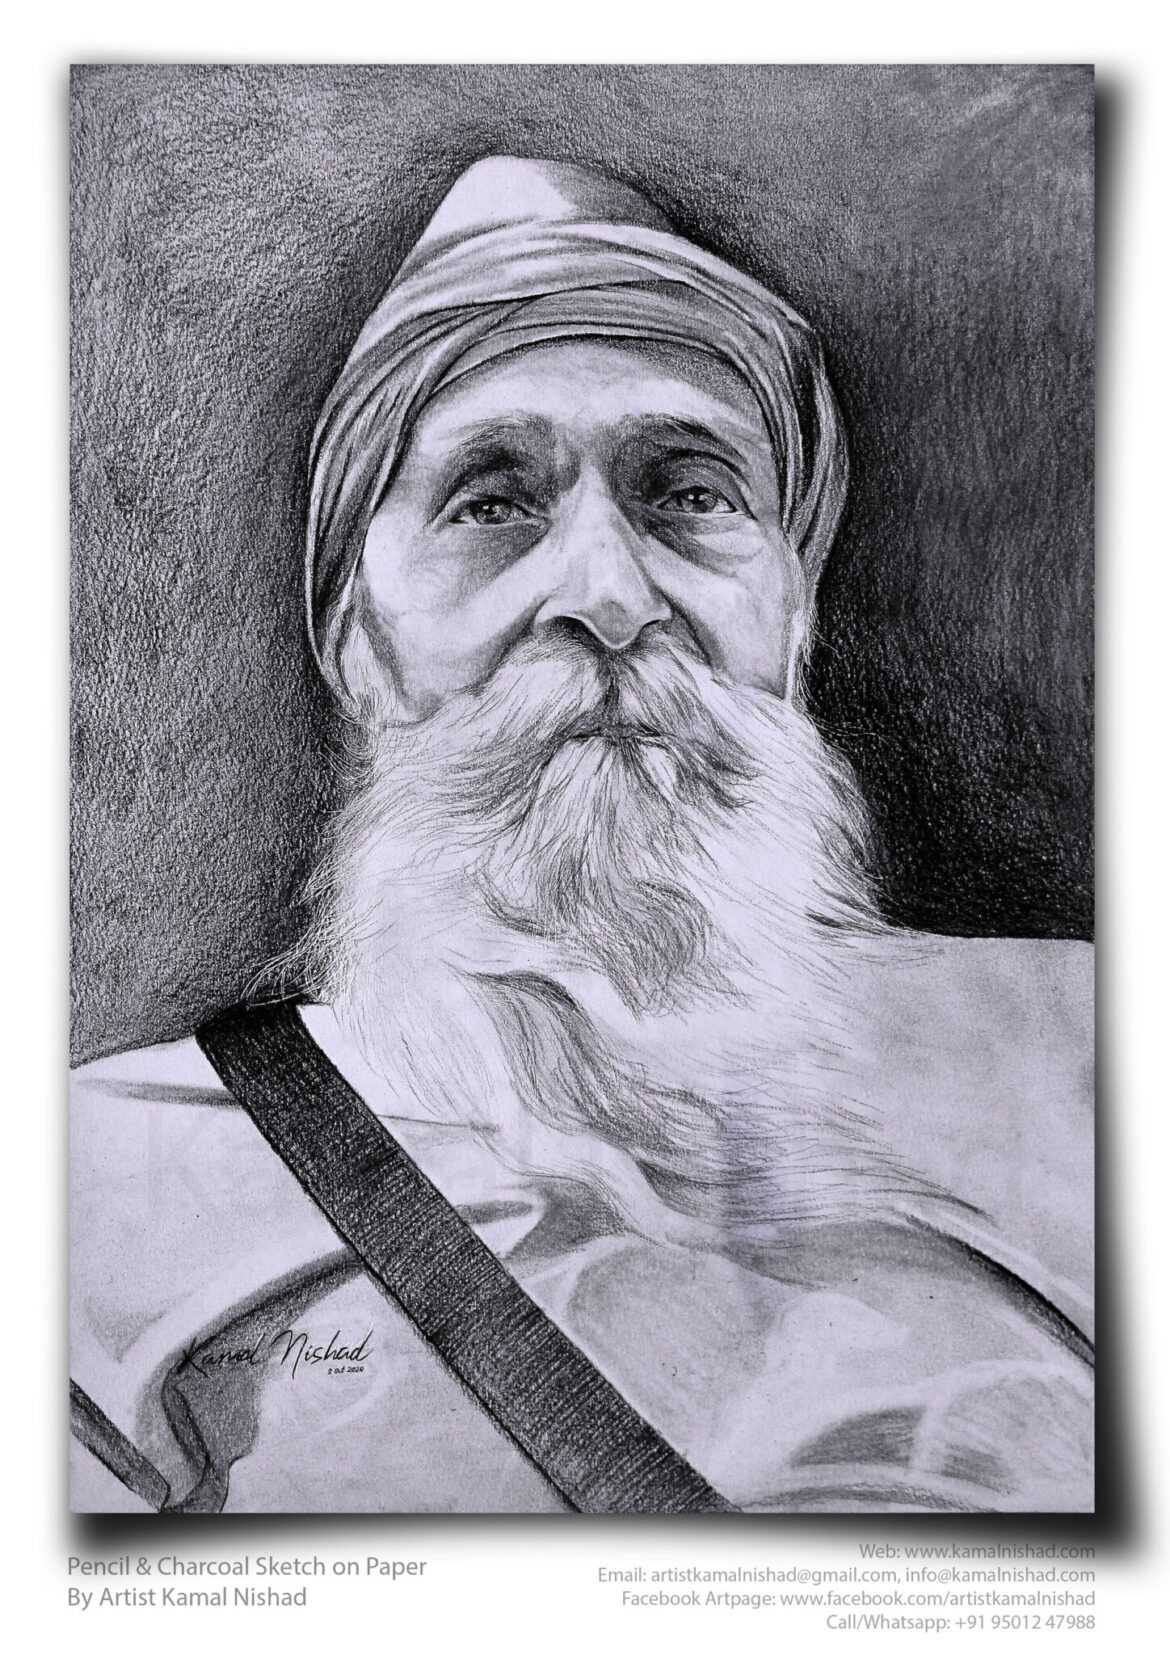 OLD MAN | Pencil & Charcoal Sketch Title : OLD MAN Medium : Pencil & Charcoal Sketch Size : A3 Paper size (Sketch size 18.5 x 23.7 cm*) Artist : Kamal Nishad This is a Handmade/hand-drawn Sketch made with Pencil & Charcoal “OLD MAN”. One of my client/customer wanted me to draw this portrait for his home. SIZE: Paper size A3 (work area 11.7 x 16.5 inches *estimated) Created by © Kamal Nishad. All rights reserved.